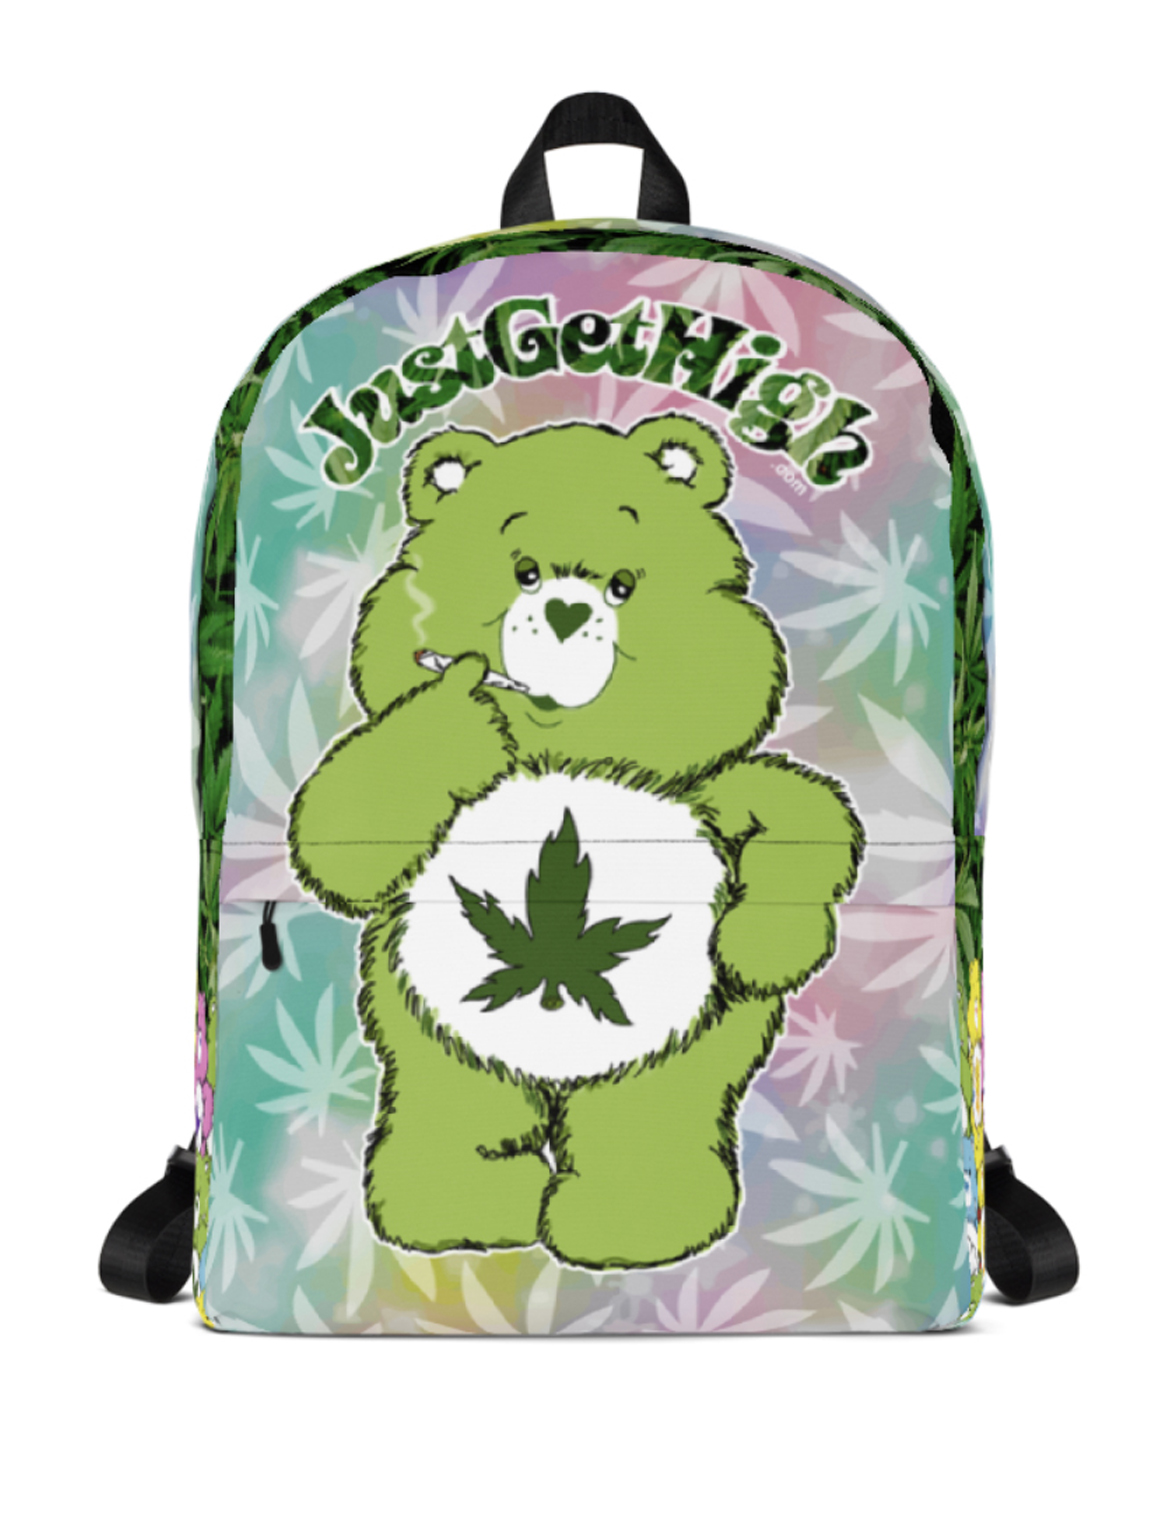 just get high_backpack_cannabear leaf_front